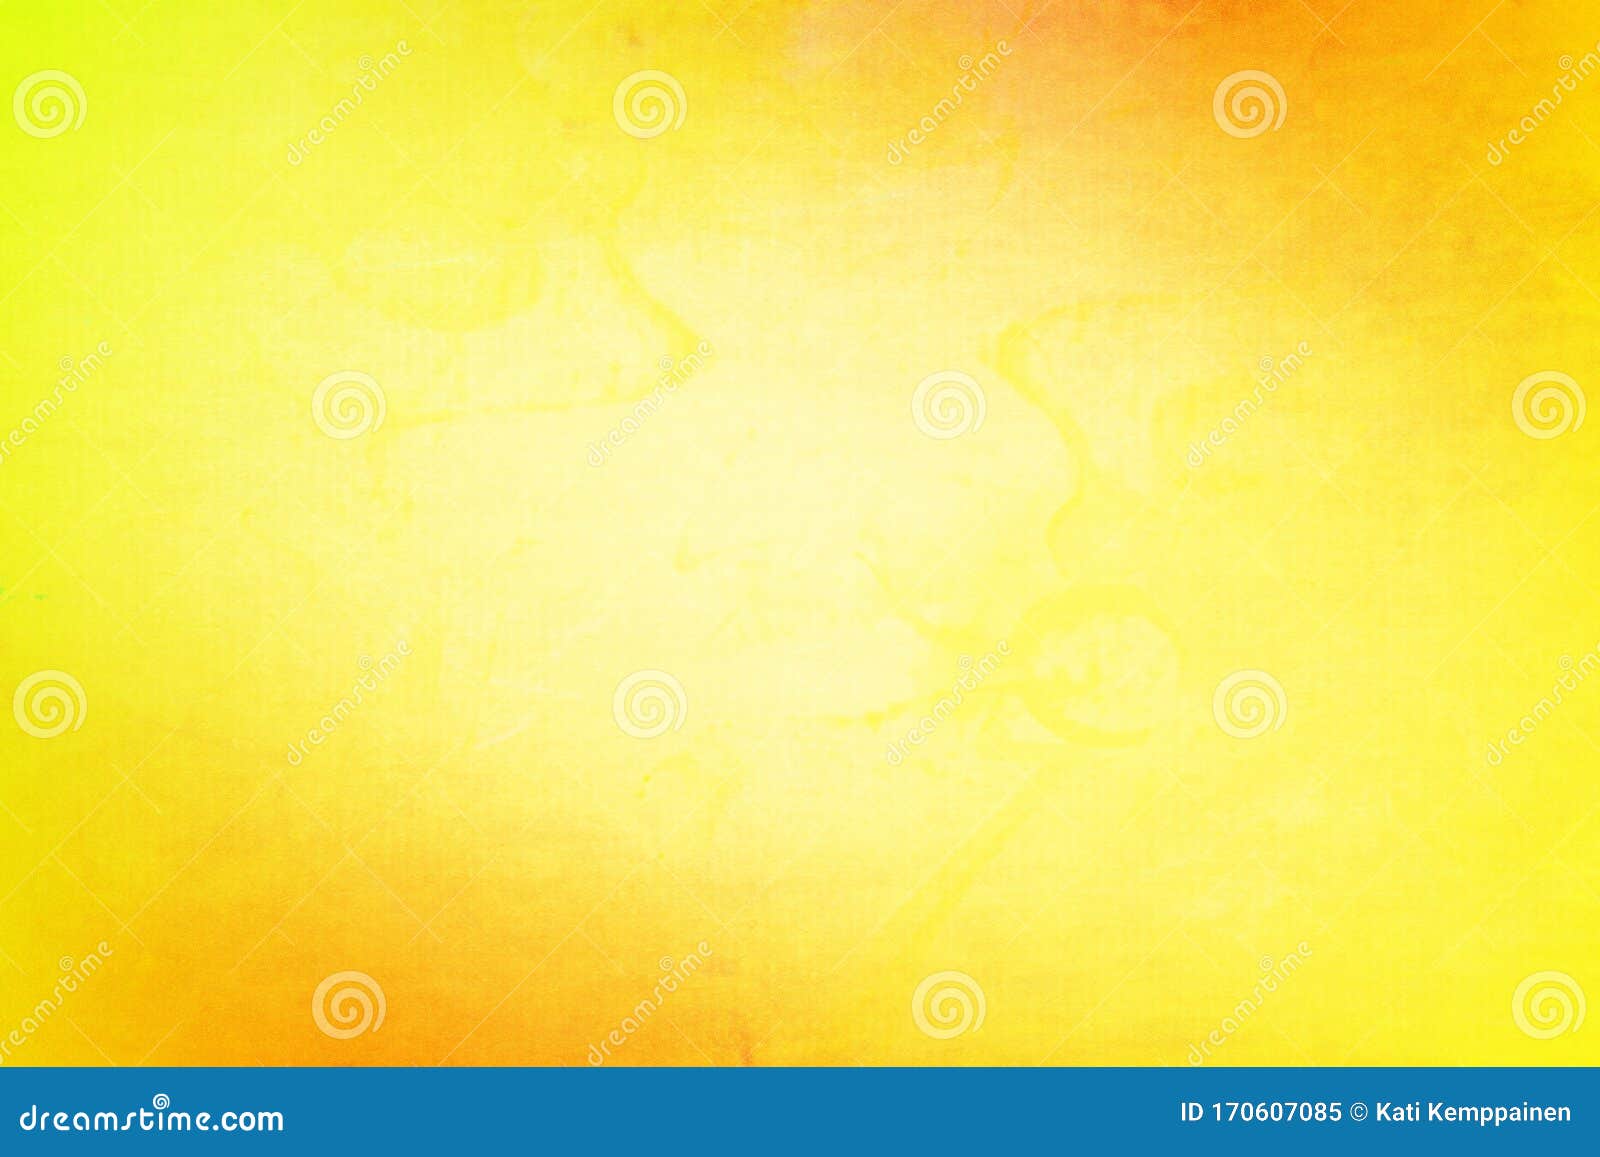 12891 Orange Background Texture Photos and Premium High Res Pictures   Getty Images